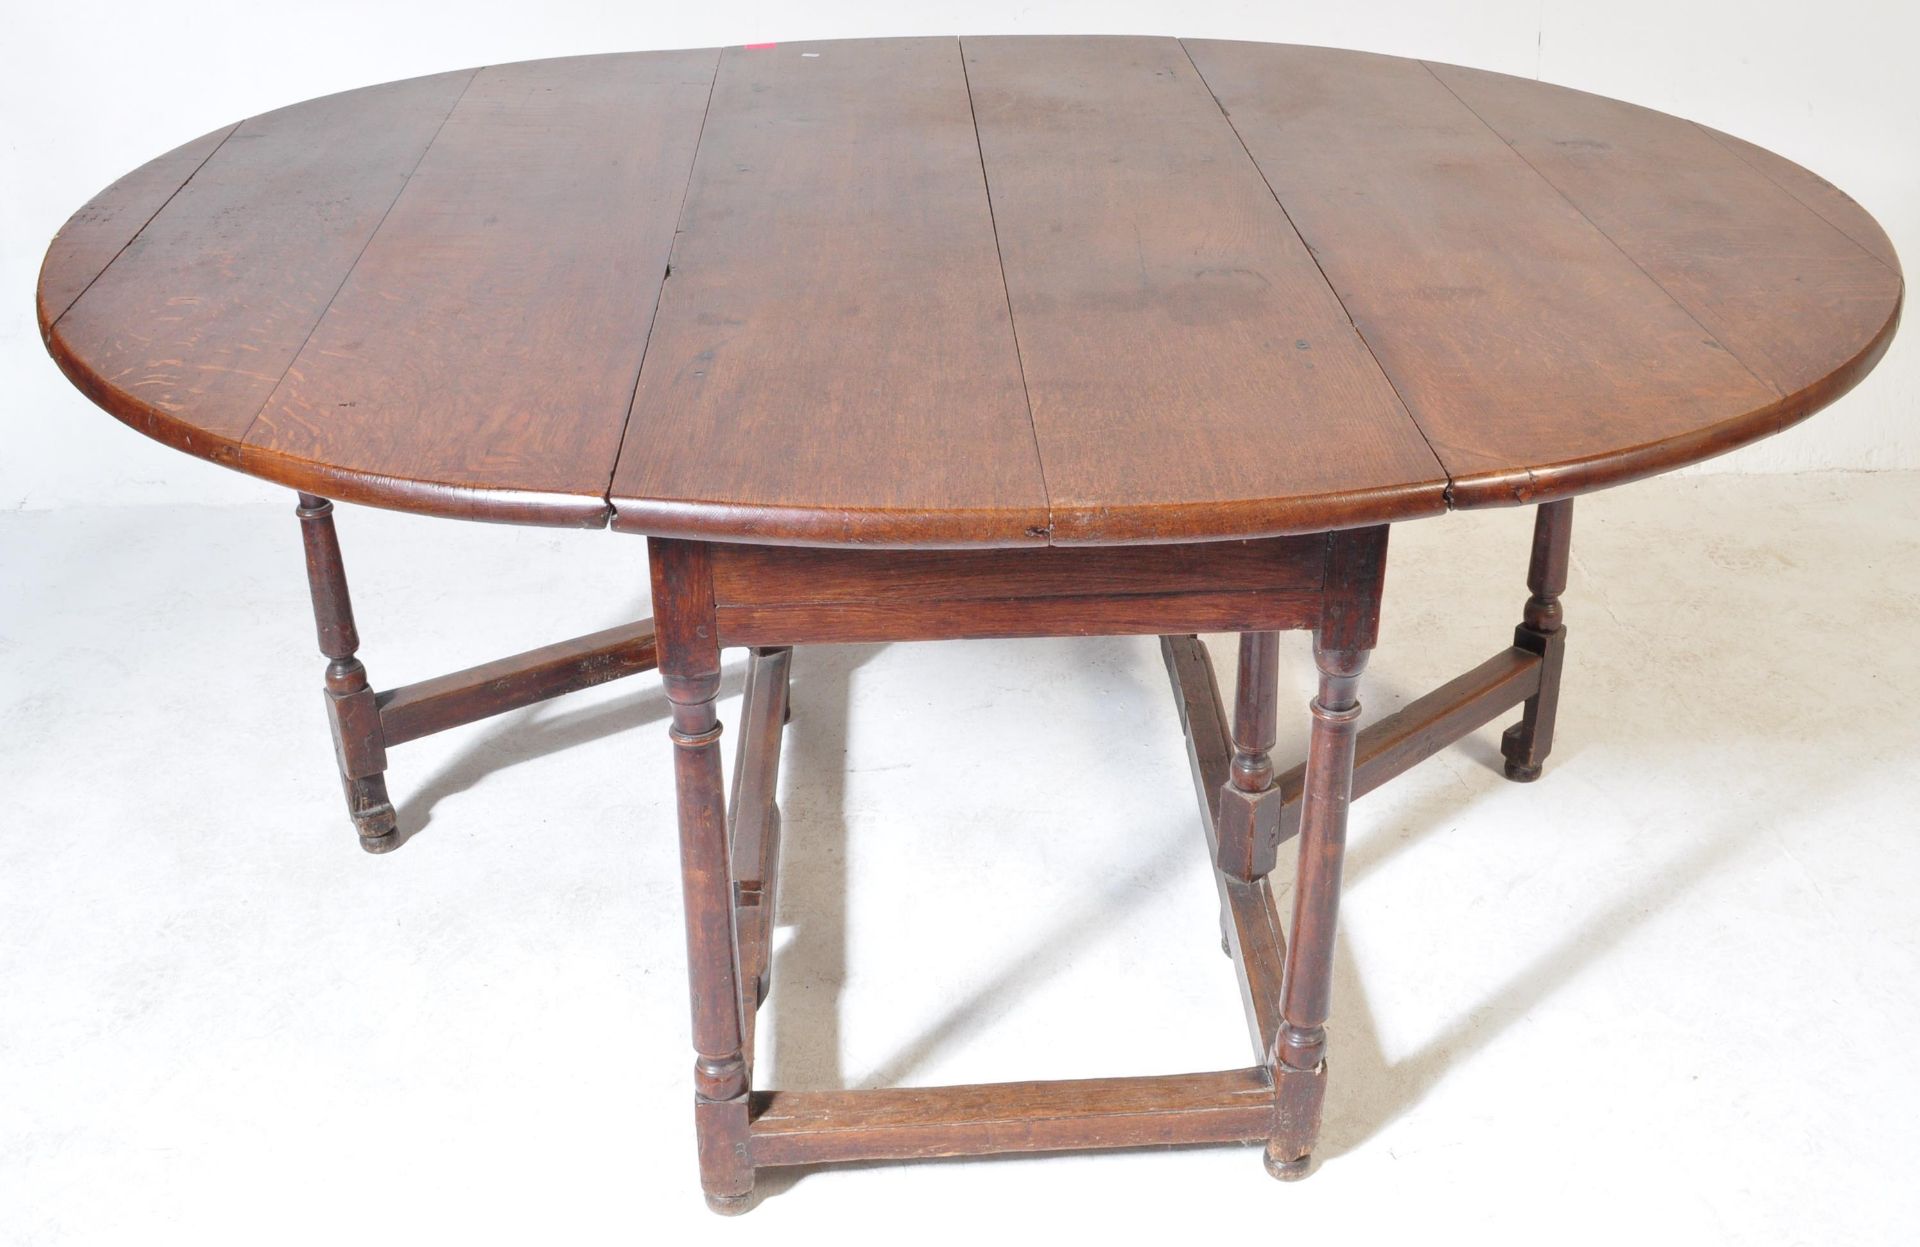 LARGE 19TH CENTURY FRENCH OAK DROP LEAF WAKE DINING TABLE - Image 4 of 4